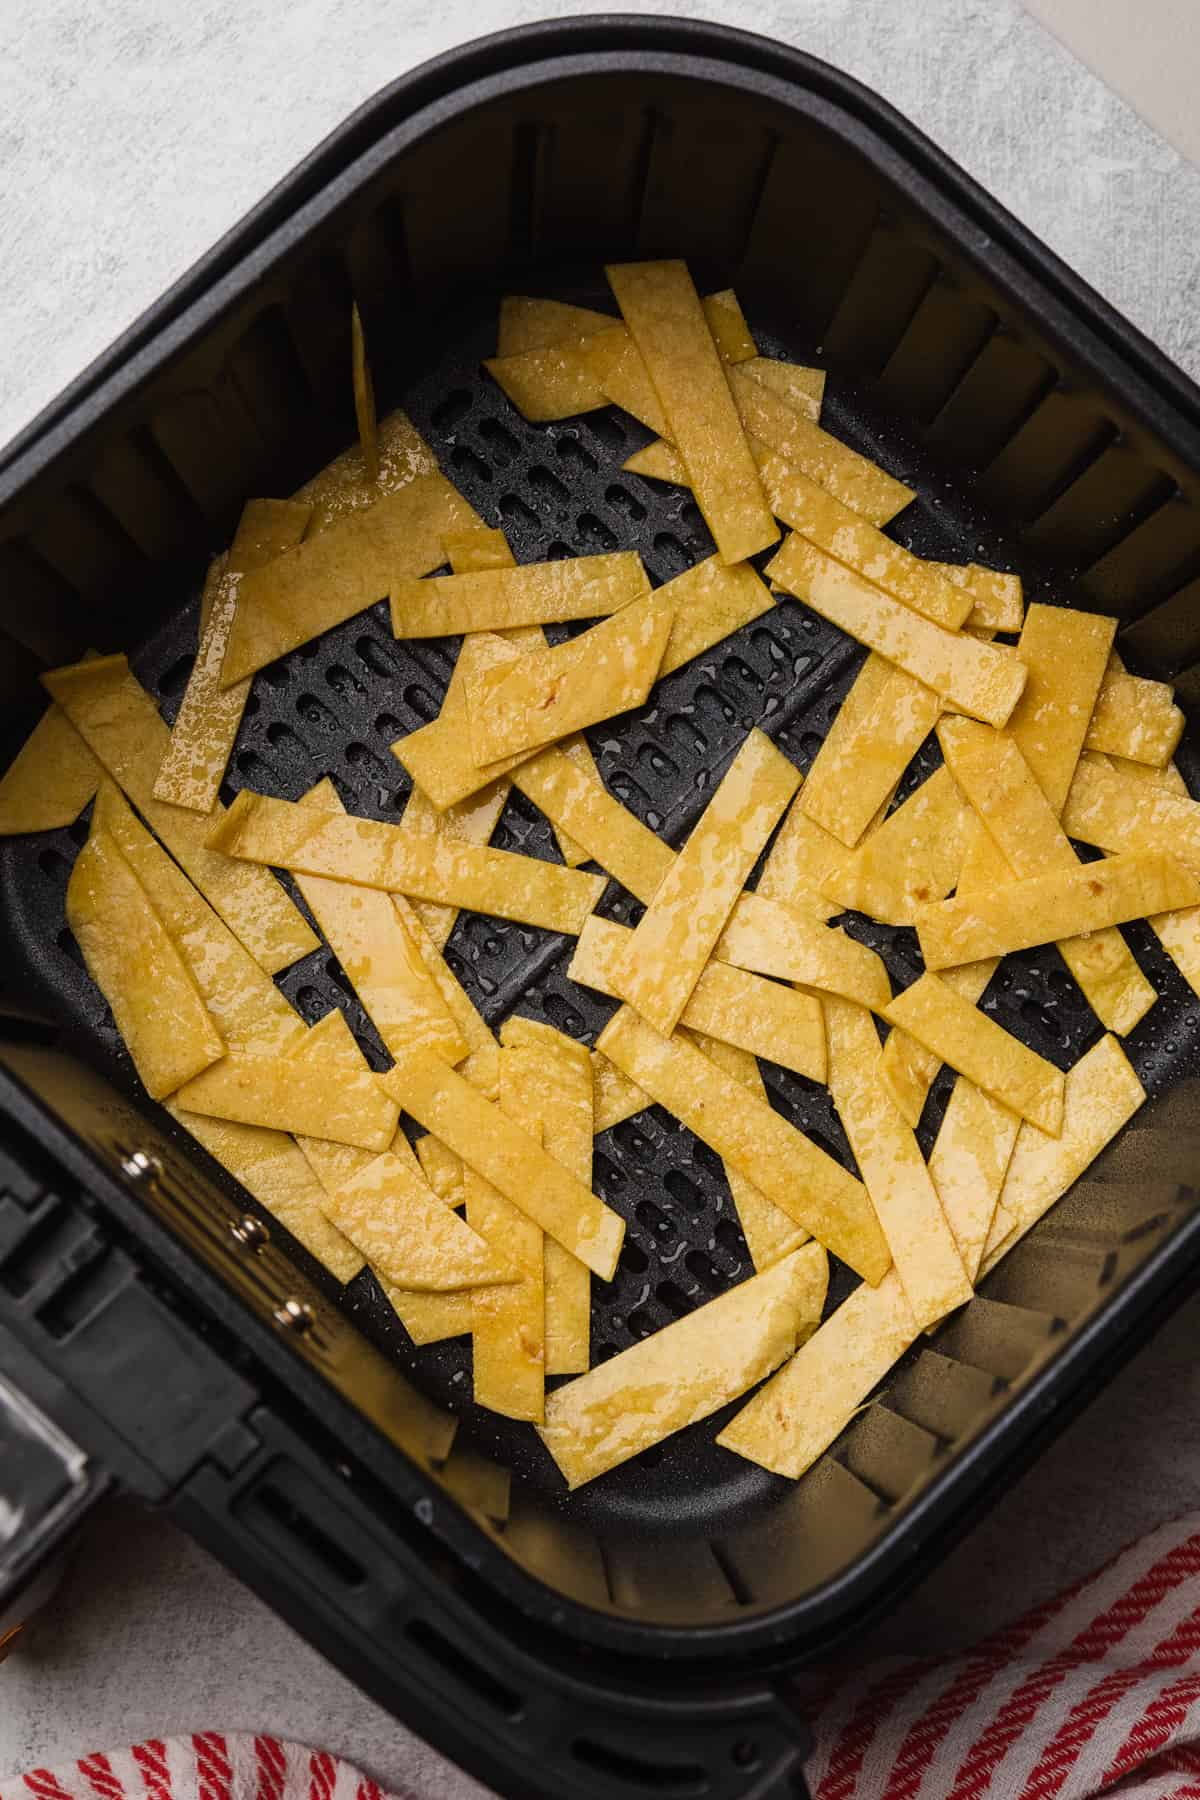 Corn tortilla strips in the air fryer basket before cooking.